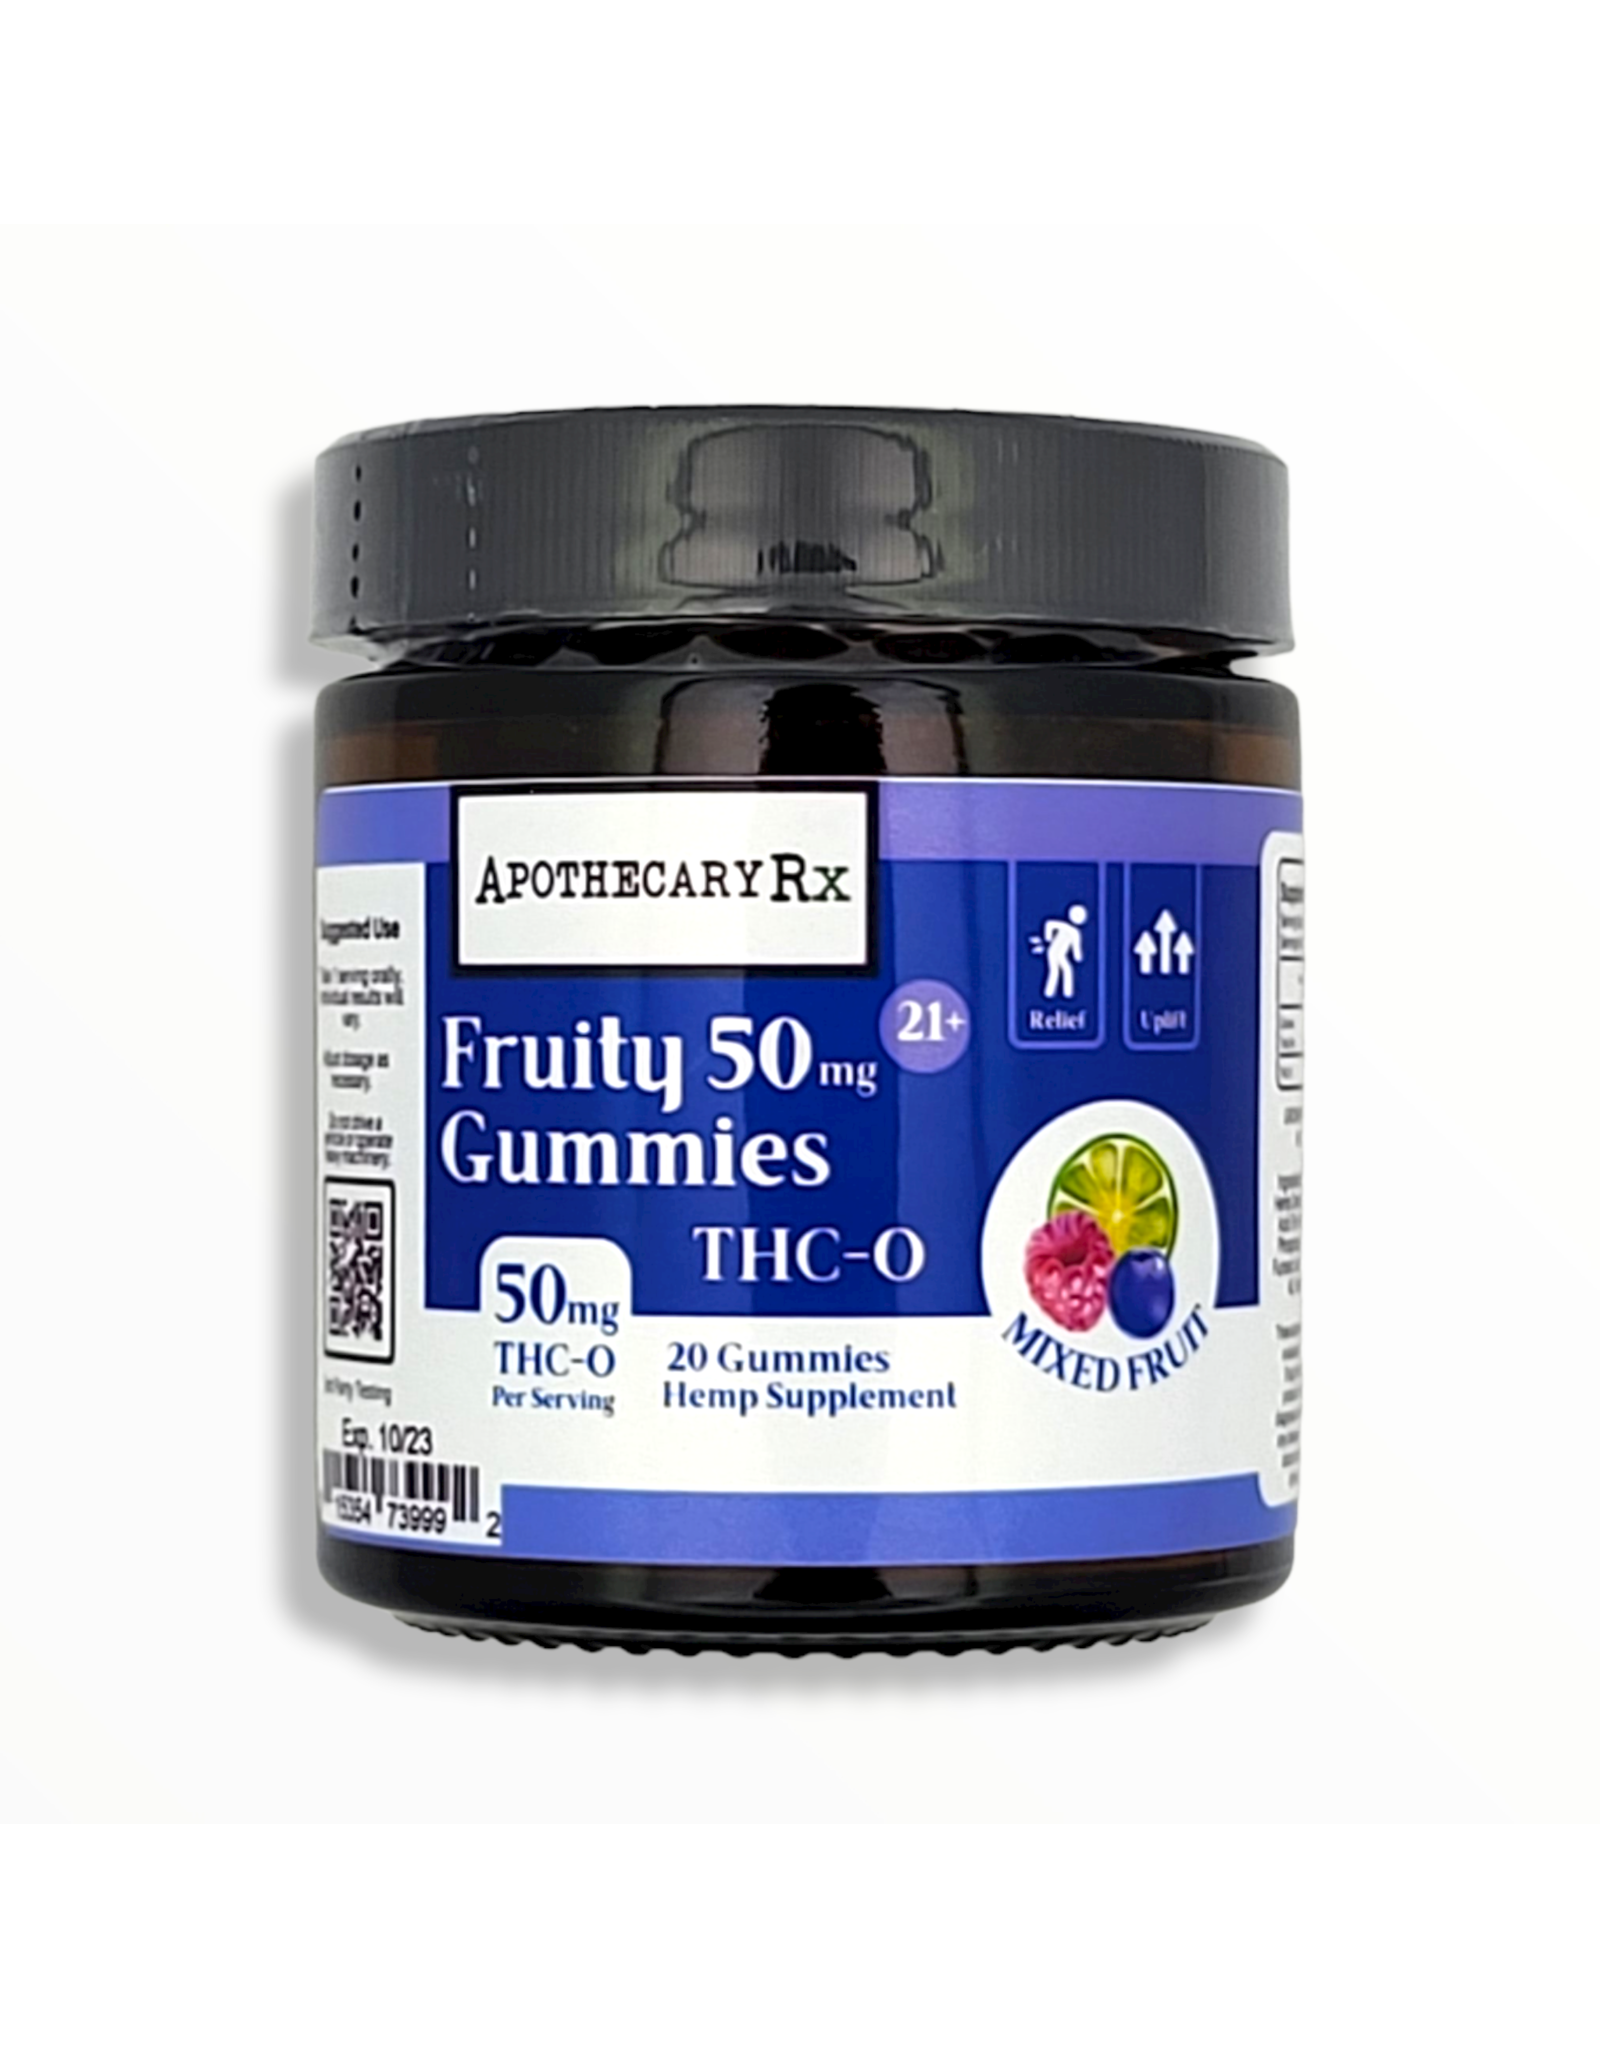 Apothecary Rx Apothecary Rx THCO Gummies 20 count 50mg